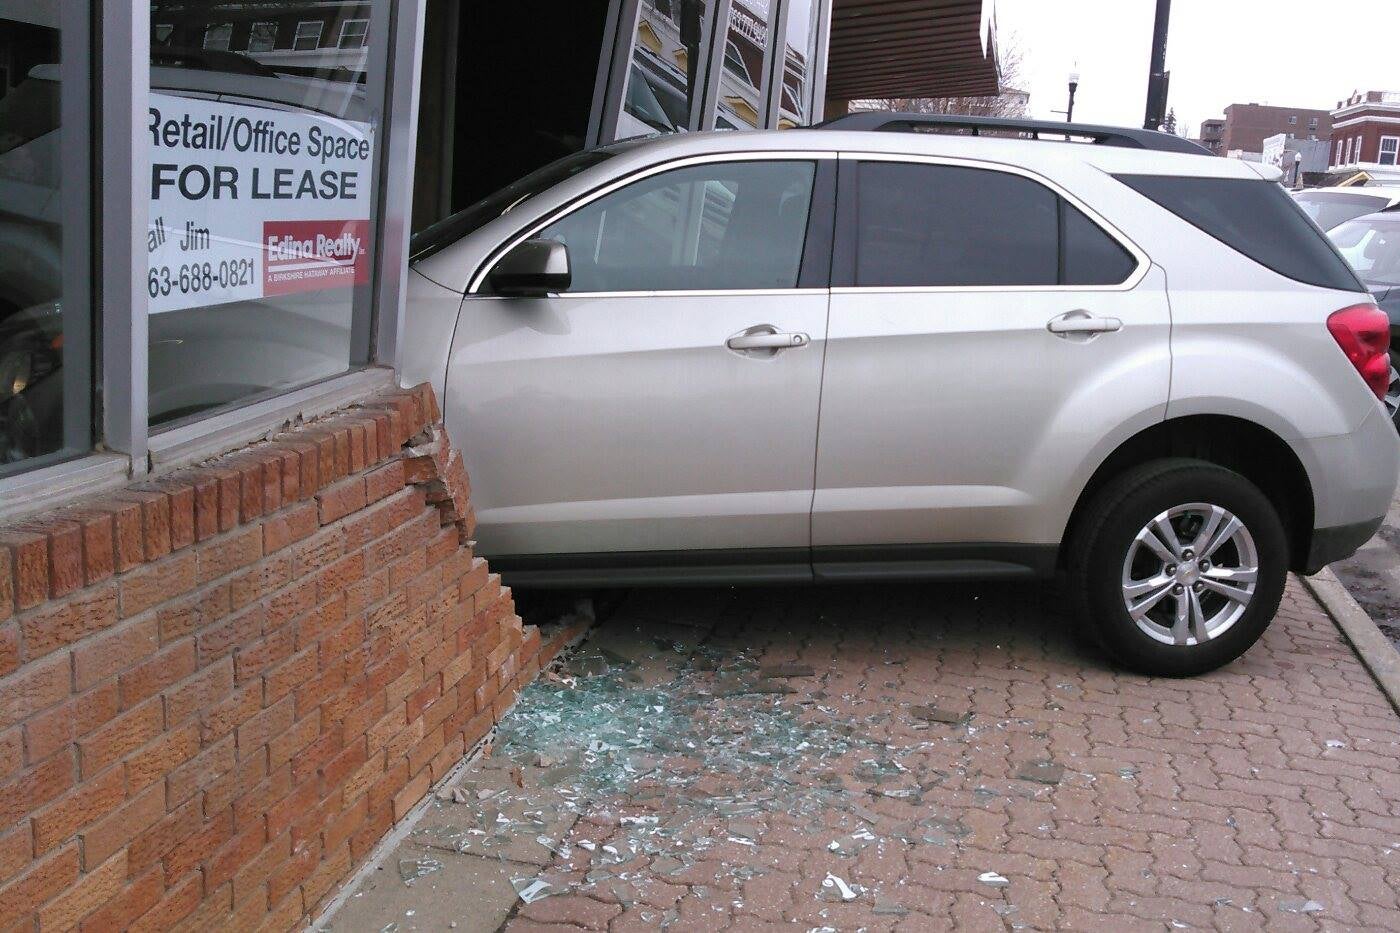 A car surrounded by shattered glass that has crashed through the front of a building.